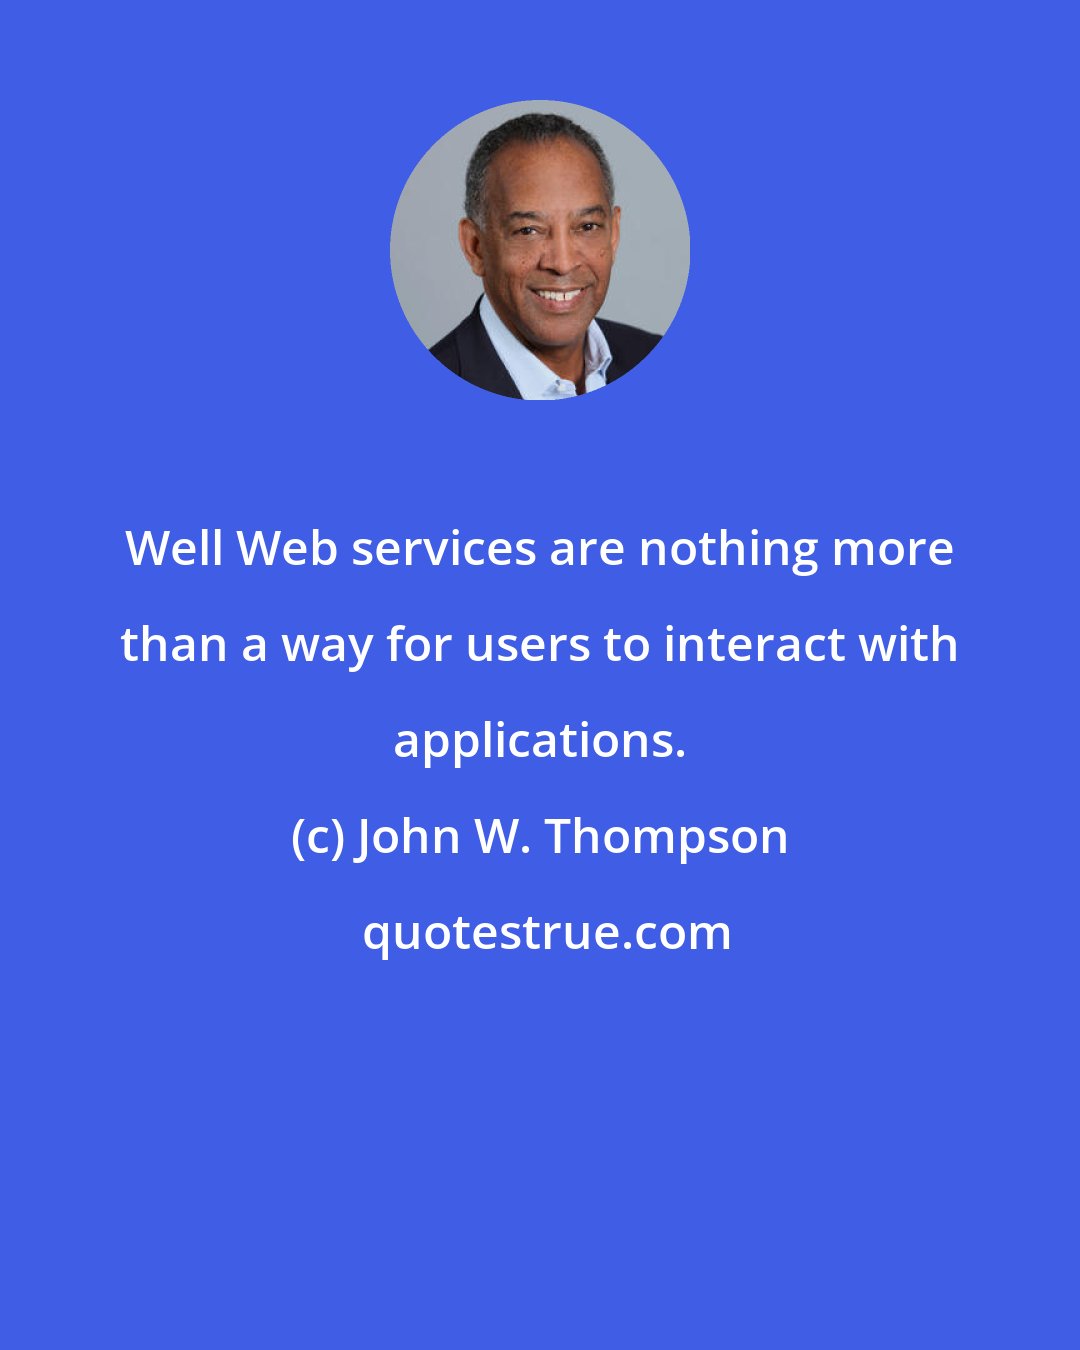 John W. Thompson: Well Web services are nothing more than a way for users to interact with applications.